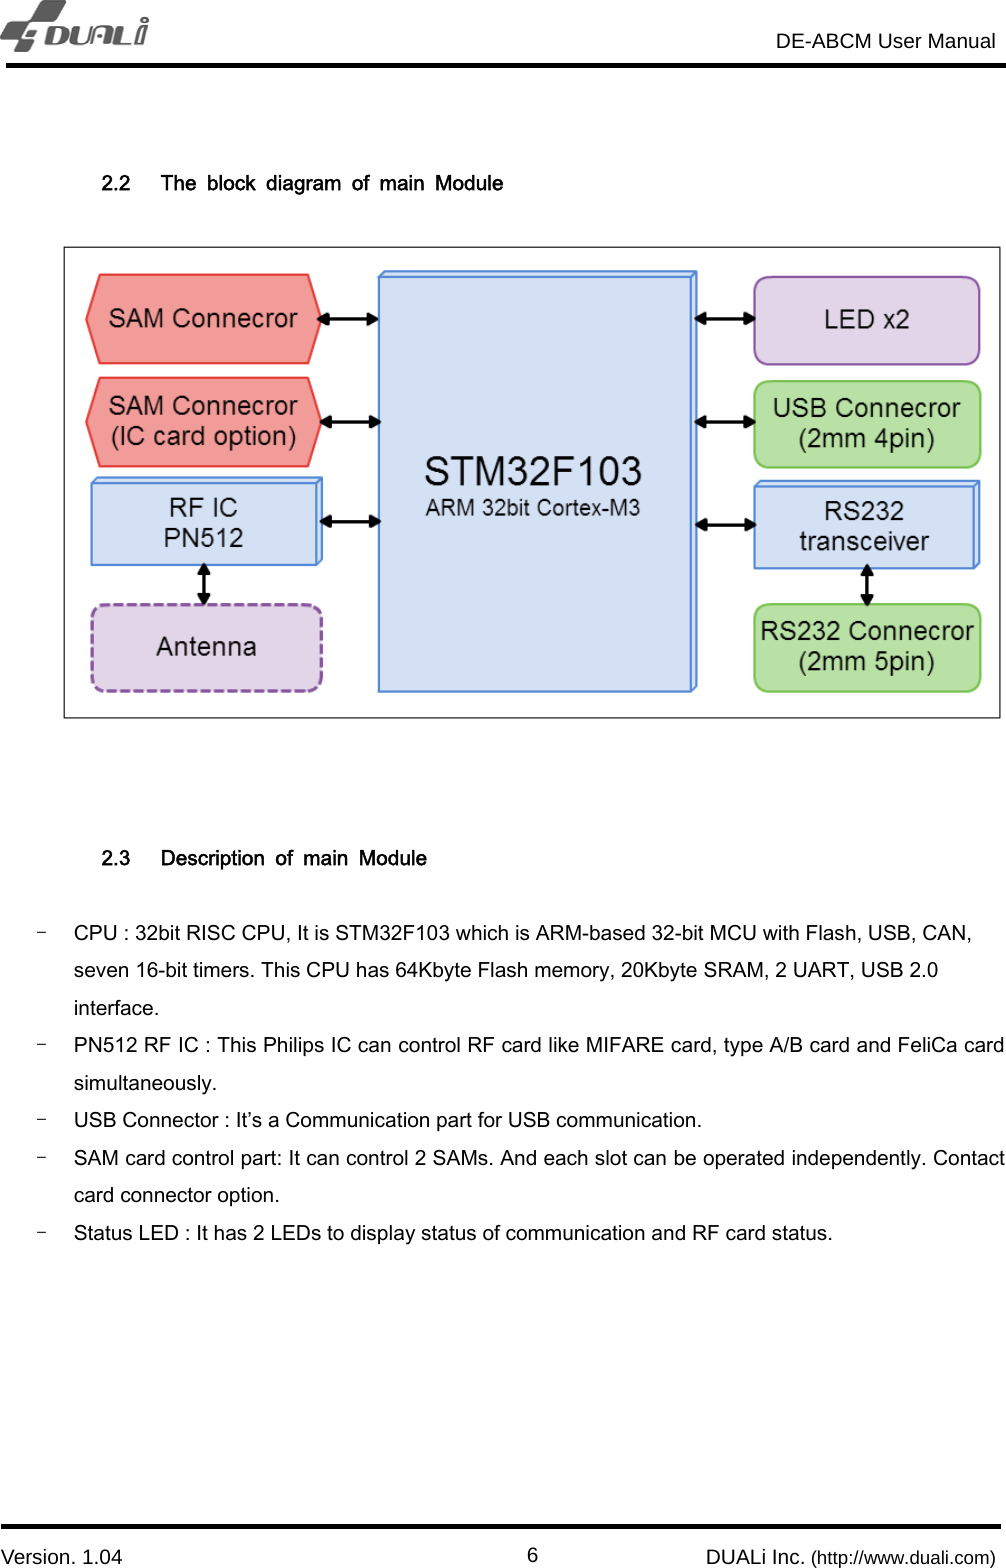                                                                       DE-ABCM User Manual                            Version. 1.04                                                        DUALi Inc. (http://www.duali.com)  6 2.2 The  block  diagram  of  main  Module        2.3 Description  of  main  Module    - CPU : 32bit RISC CPU, It is STM32F103 which is ARM-based 32-bit MCU with Flash, USB, CAN, seven 16-bit timers. This CPU has 64Kbyte Flash memory, 20Kbyte SRAM, 2 UART, USB 2.0 interface. - PN512 RF IC : This Philips IC can control RF card like MIFARE card, type A/B card and FeliCa card simultaneously.   - USB Connector : It’s a Communication part for USB communication.   - SAM card control part: It can control 2 SAMs. And each slot can be operated independently. Contact card connector option. - Status LED : It has 2 LEDs to display status of communication and RF card status. 